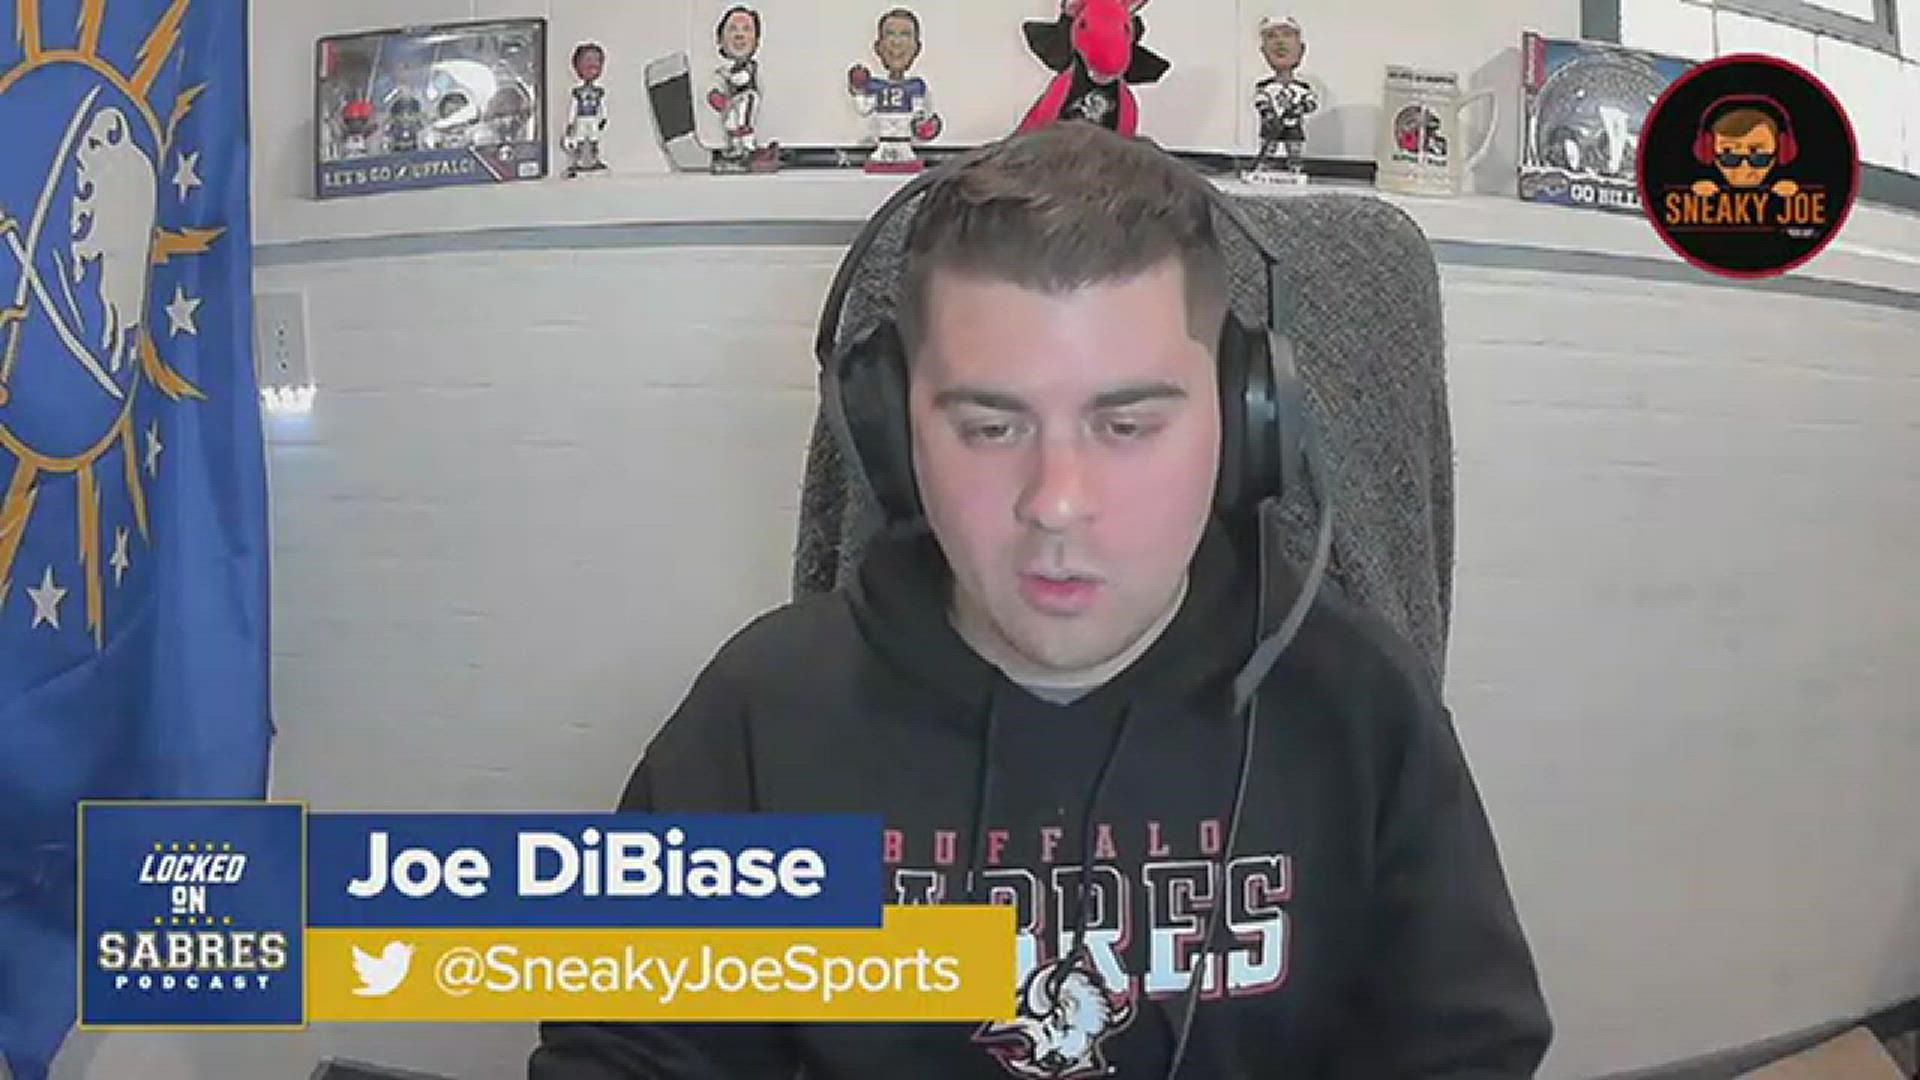 Sneaky Joe explains why the Isles are not smart and the Sabres would be smart not to make a trade for a player in his situation.